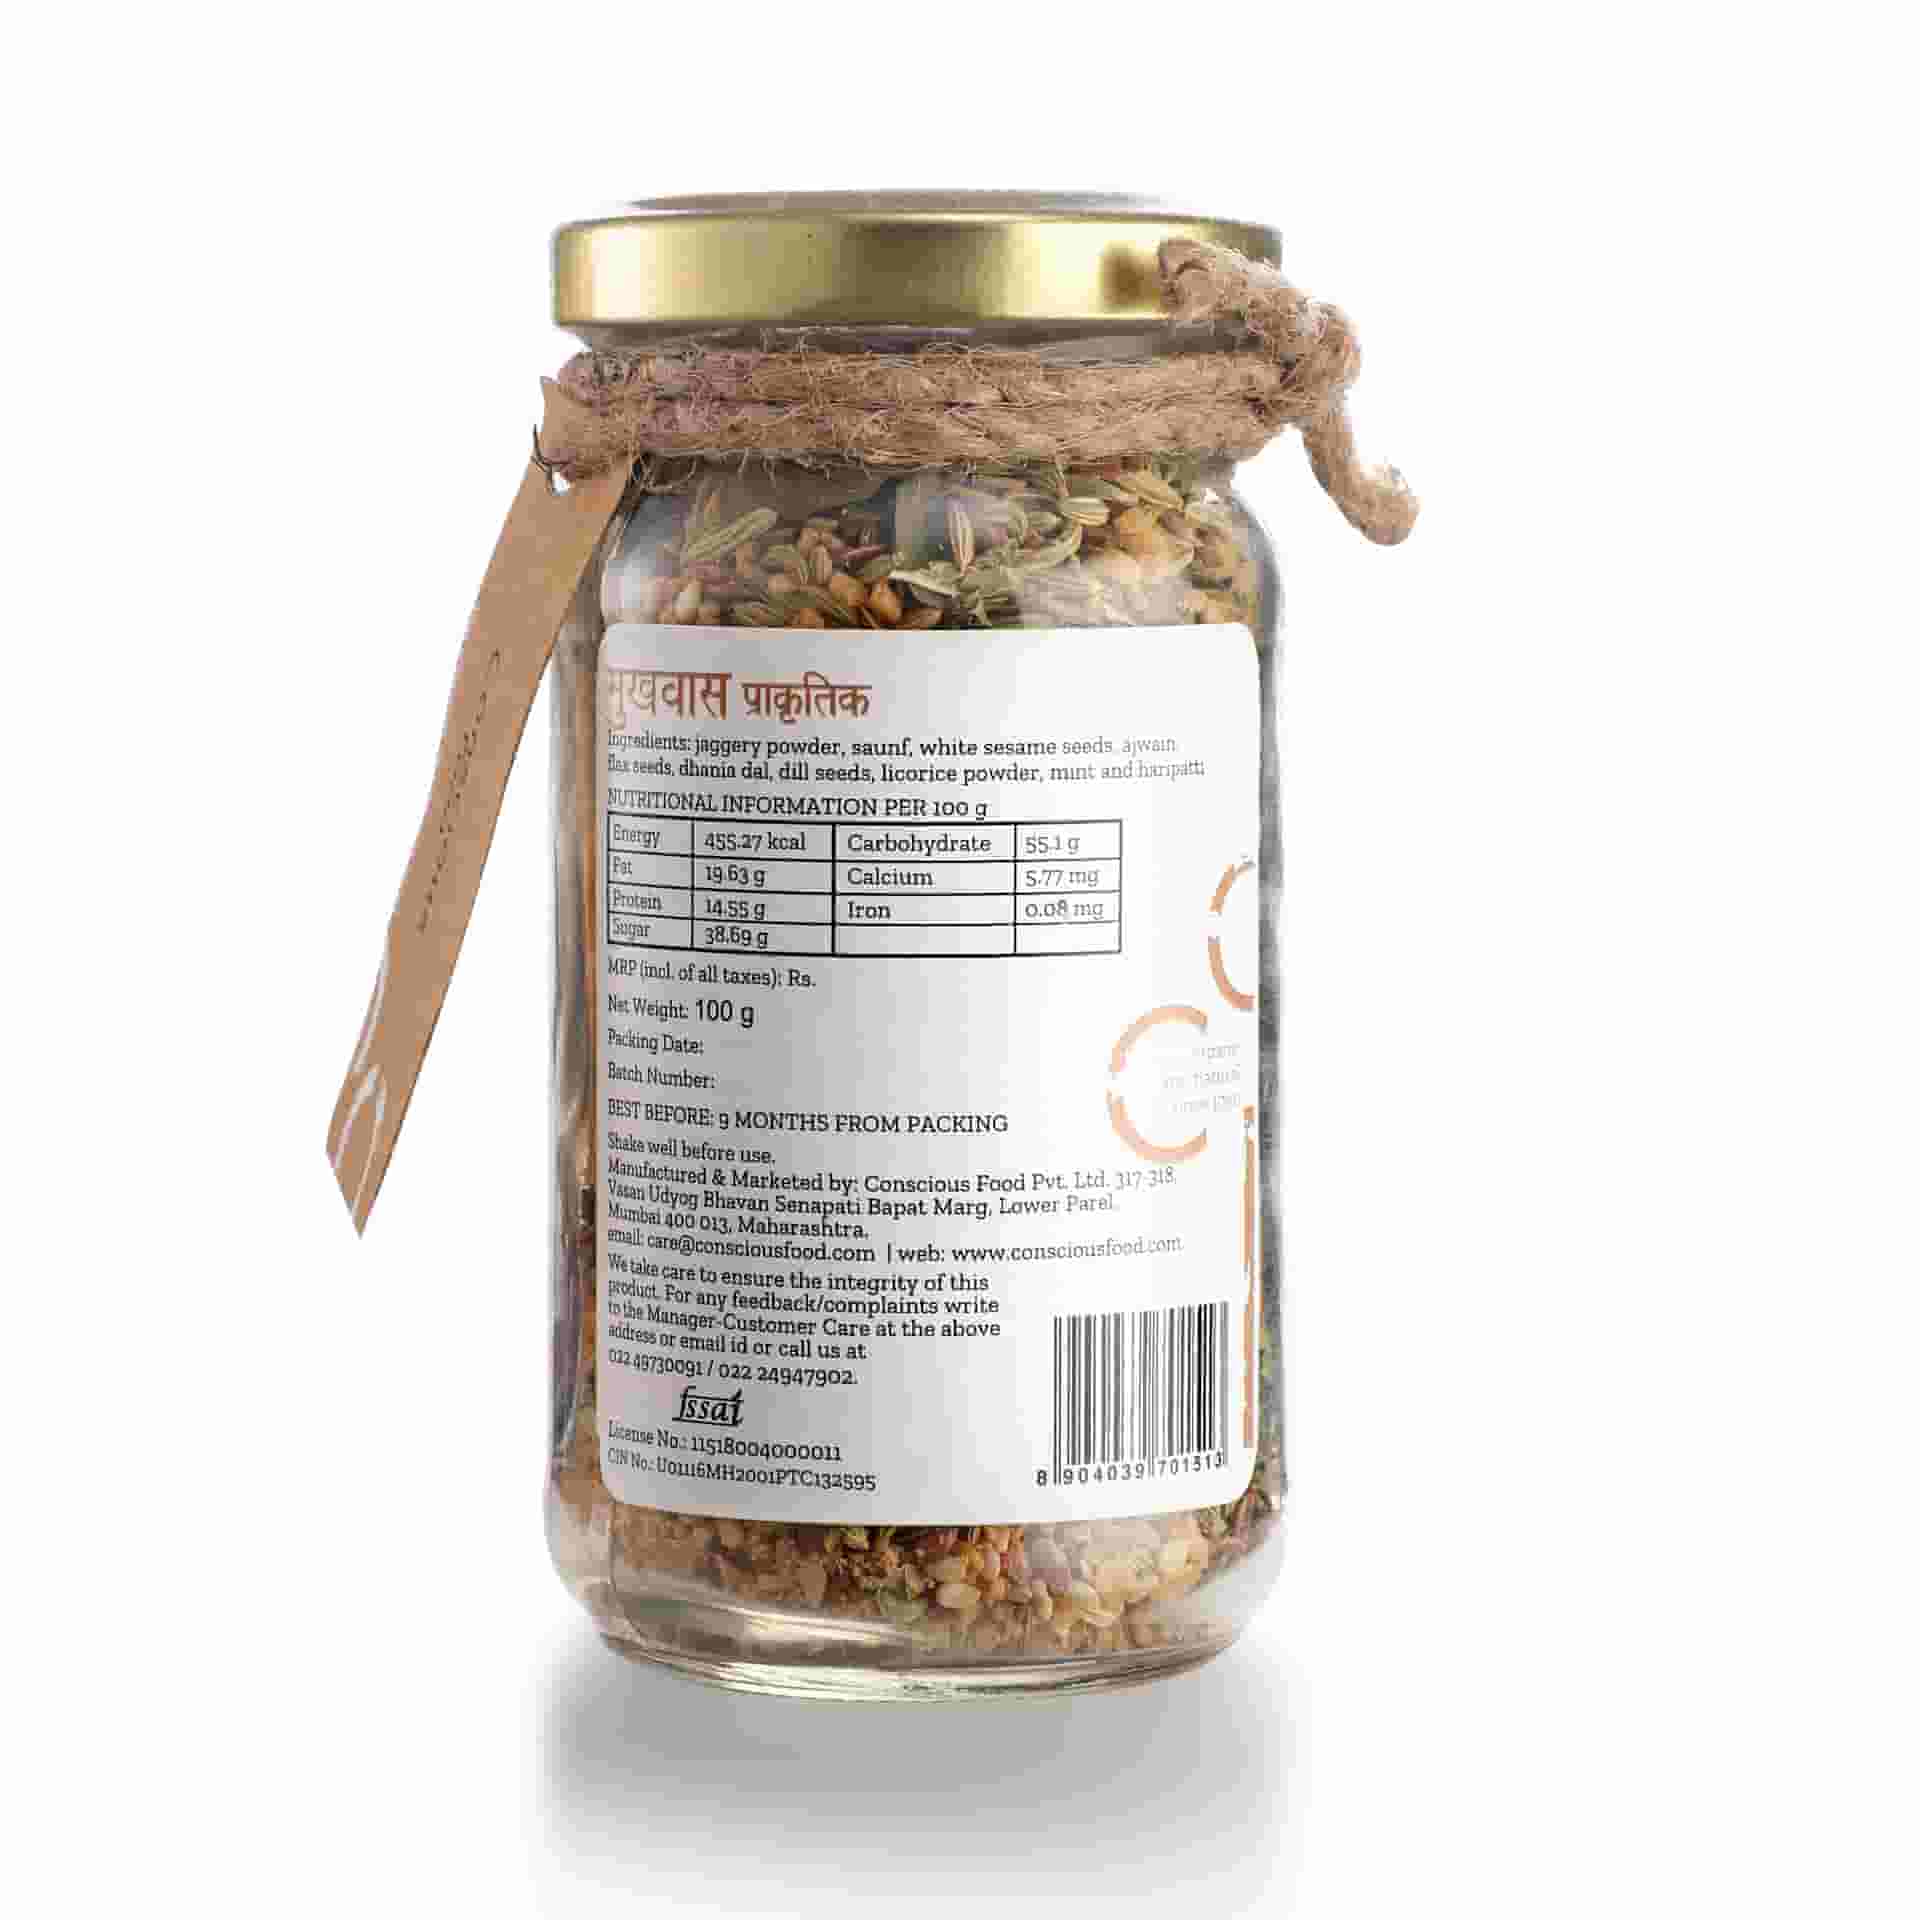 Conscious Food After Meal Digestive (100g)